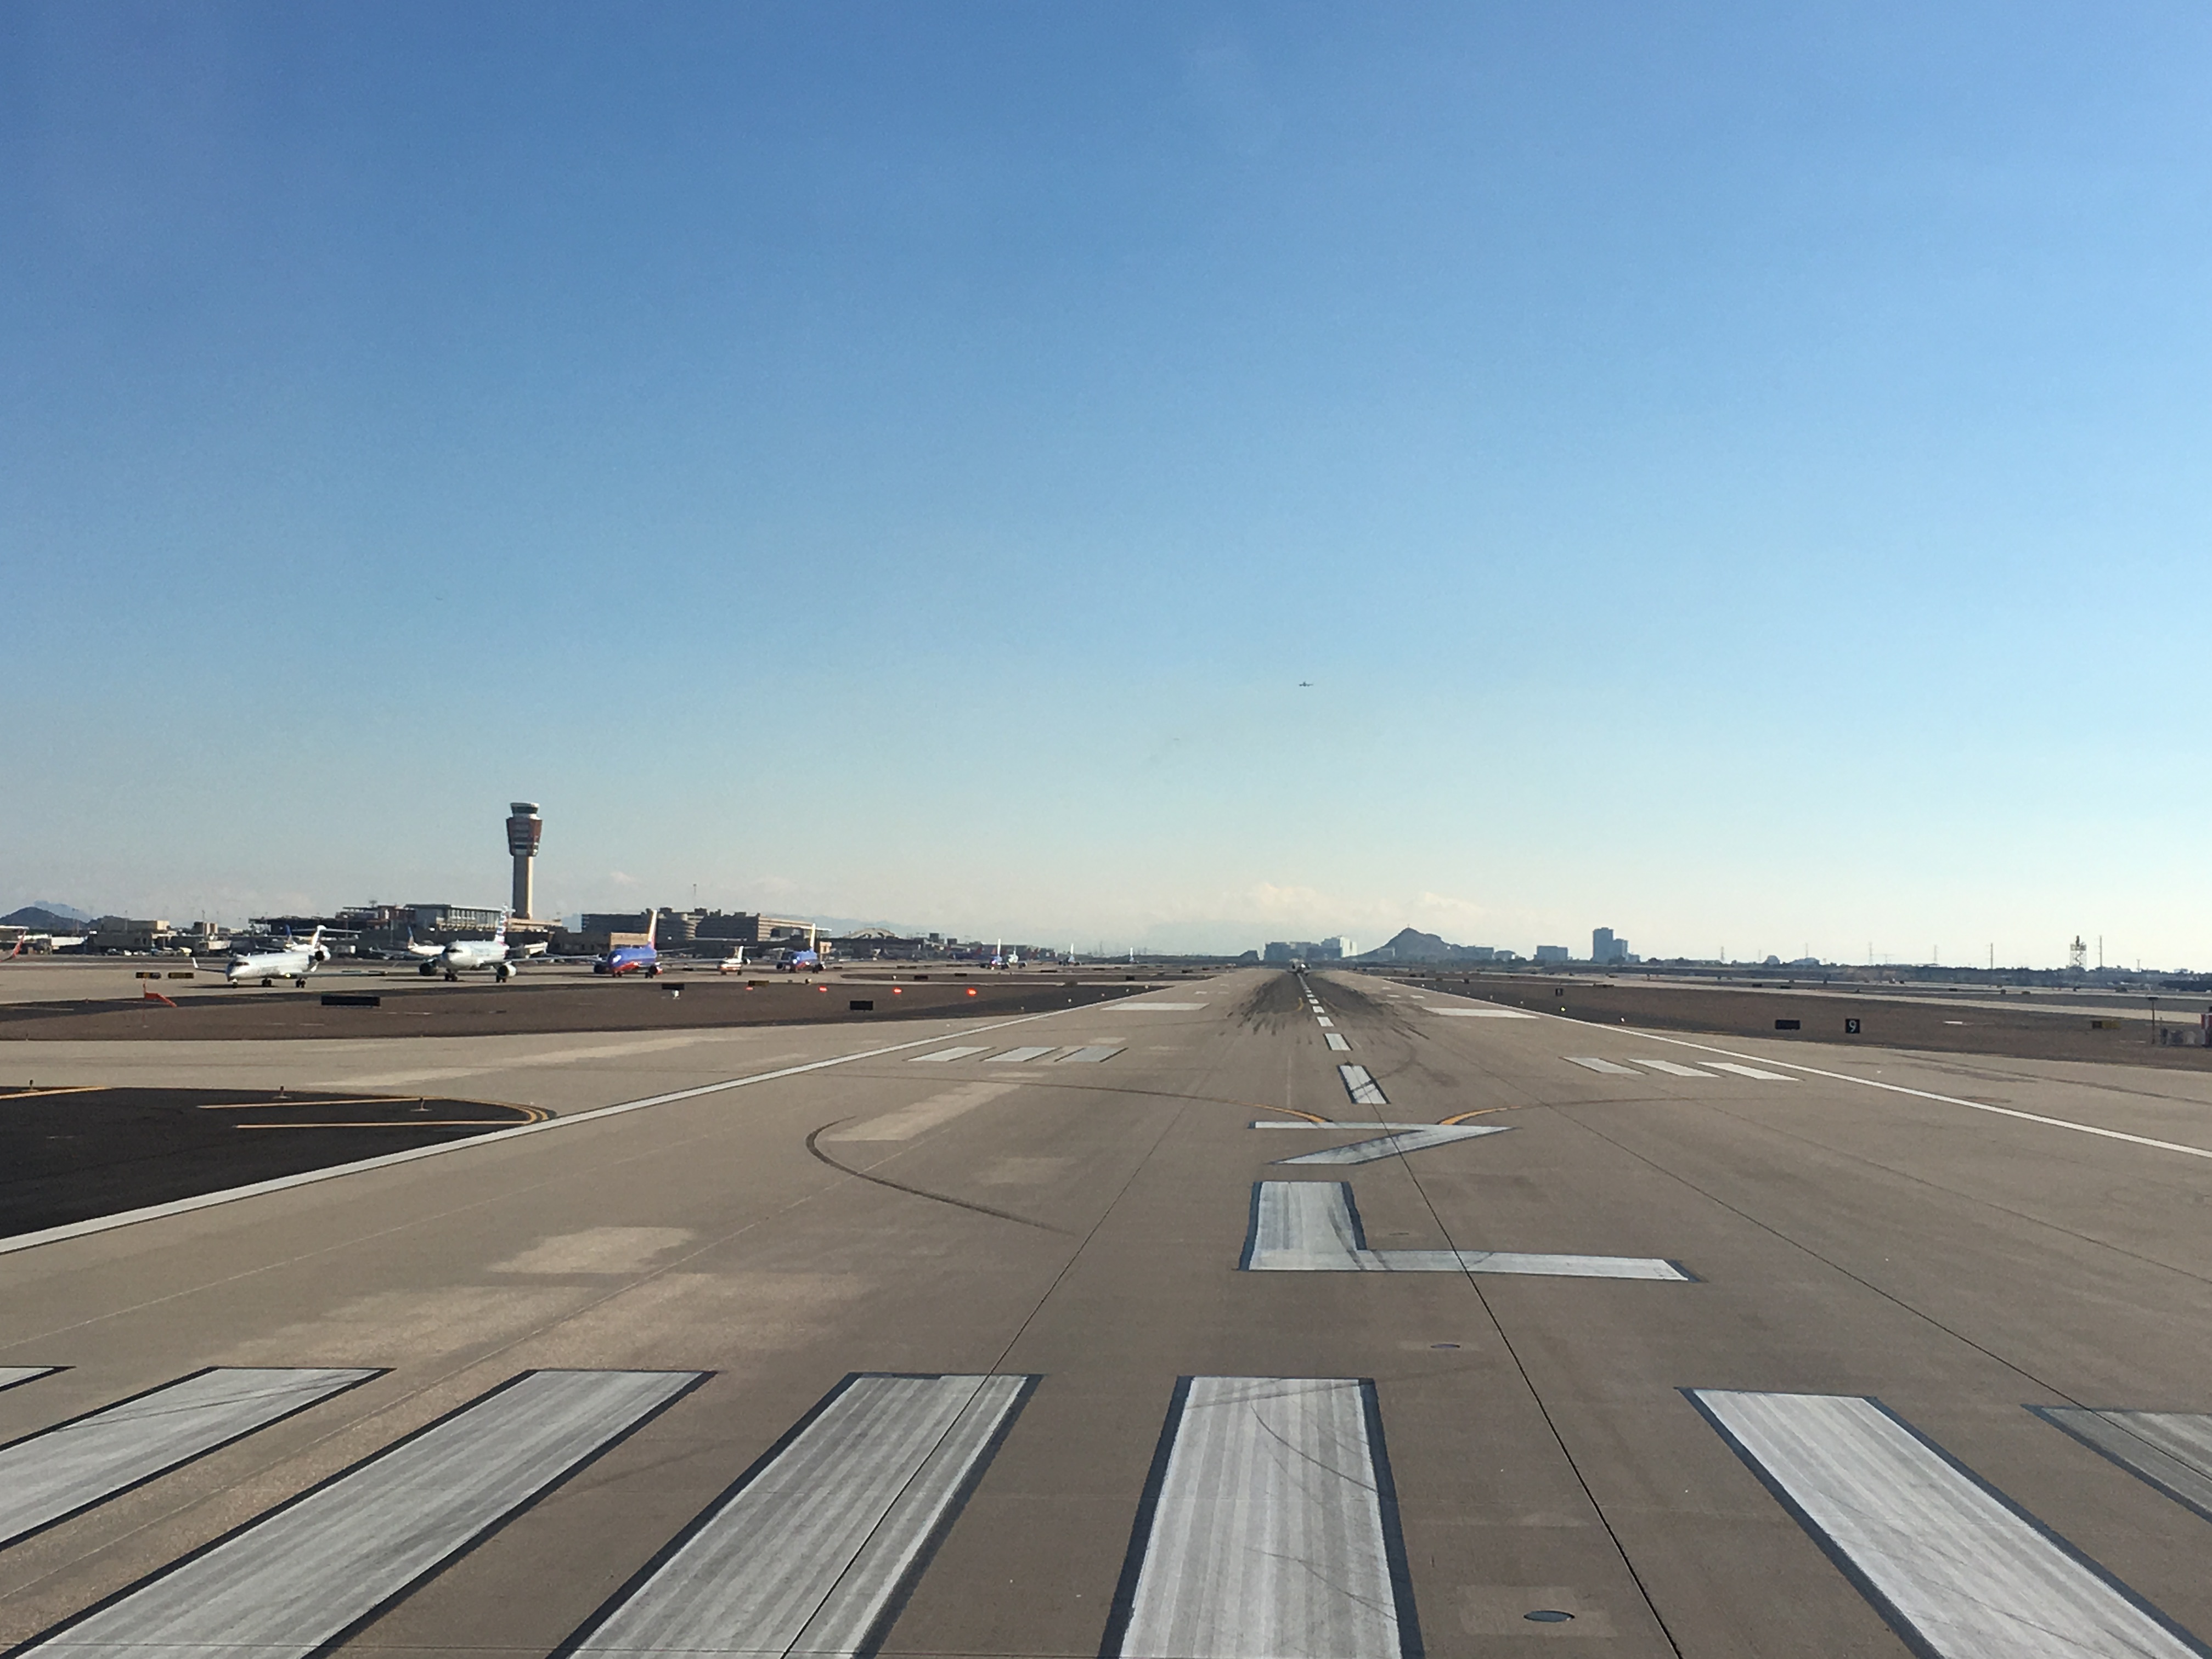 an airport runway with planes on the ground